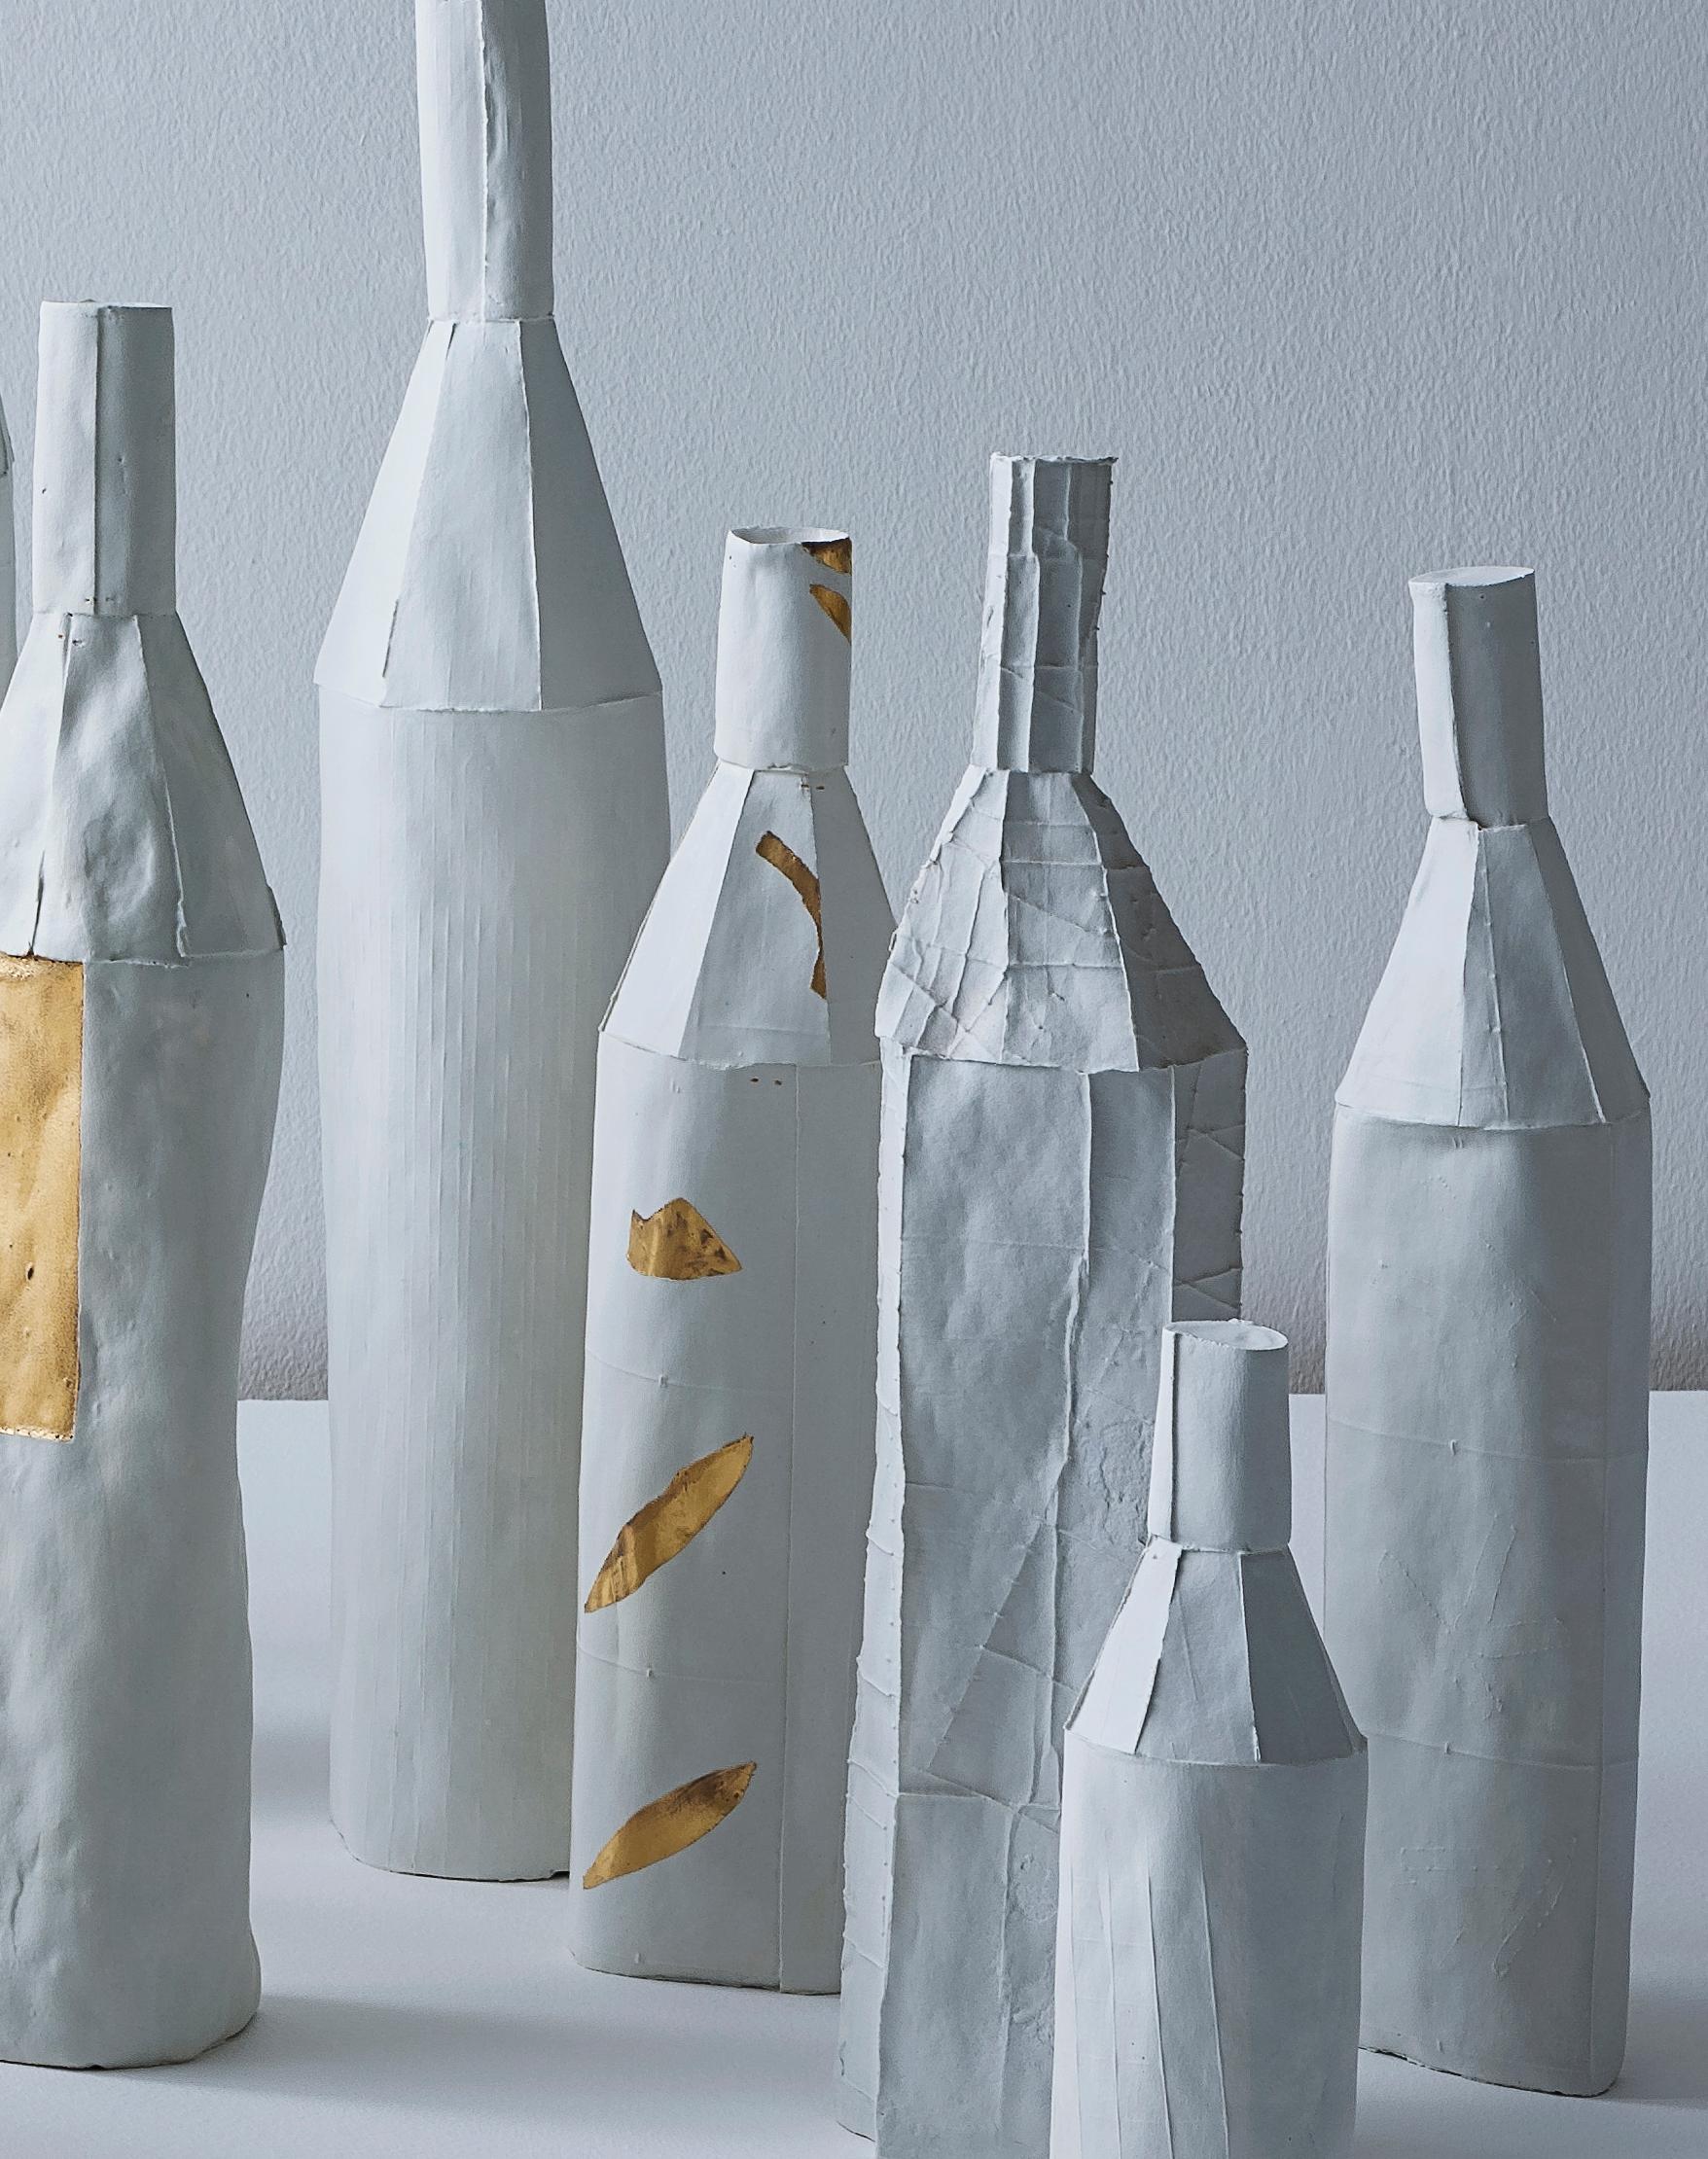 With its unique texture and one-of-a-kind quality, this bottle will be a refined accent on a table, shelf or console in any dècor. Handcrafted of paper clay (ceramic mixture enriched with paper pulp), this sculpture has a smooth surface in bright